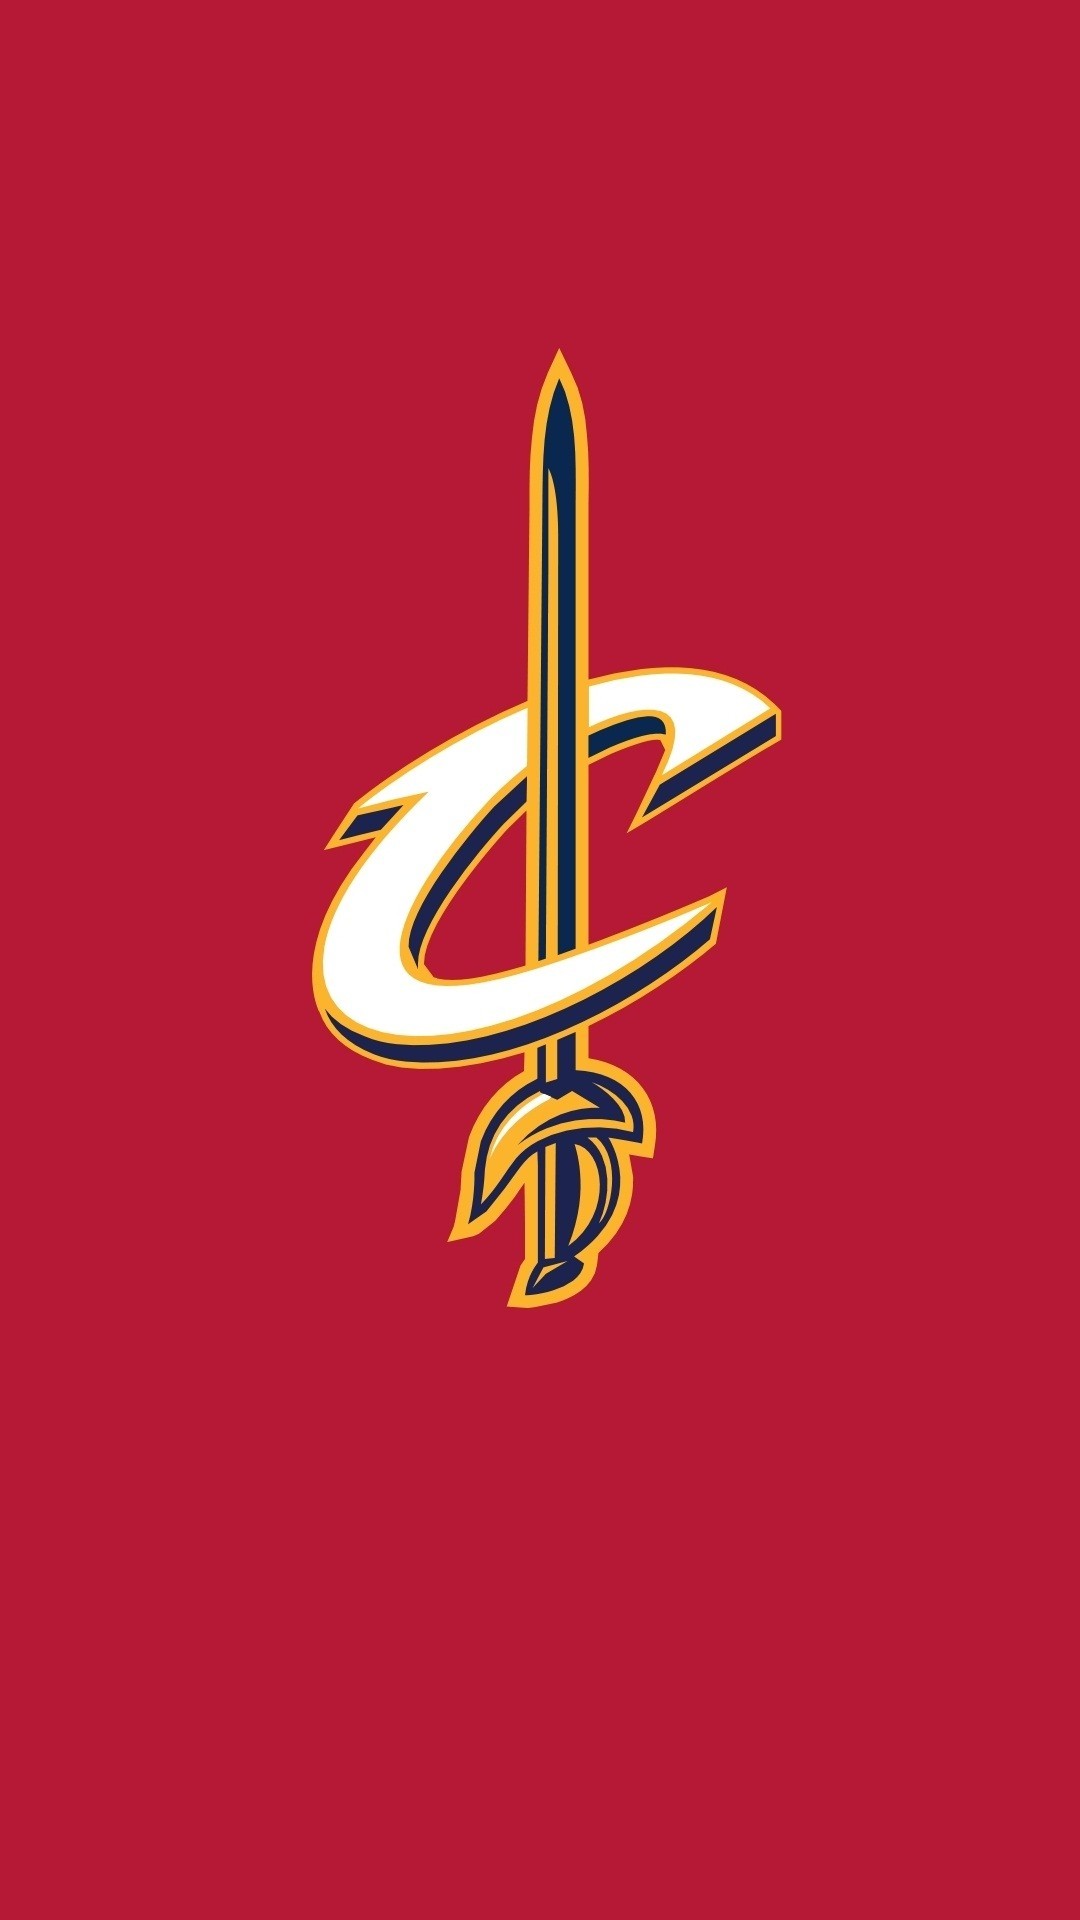 1080x1920 Cleveland Cavaliers Wallpaper For Iphone resolution 